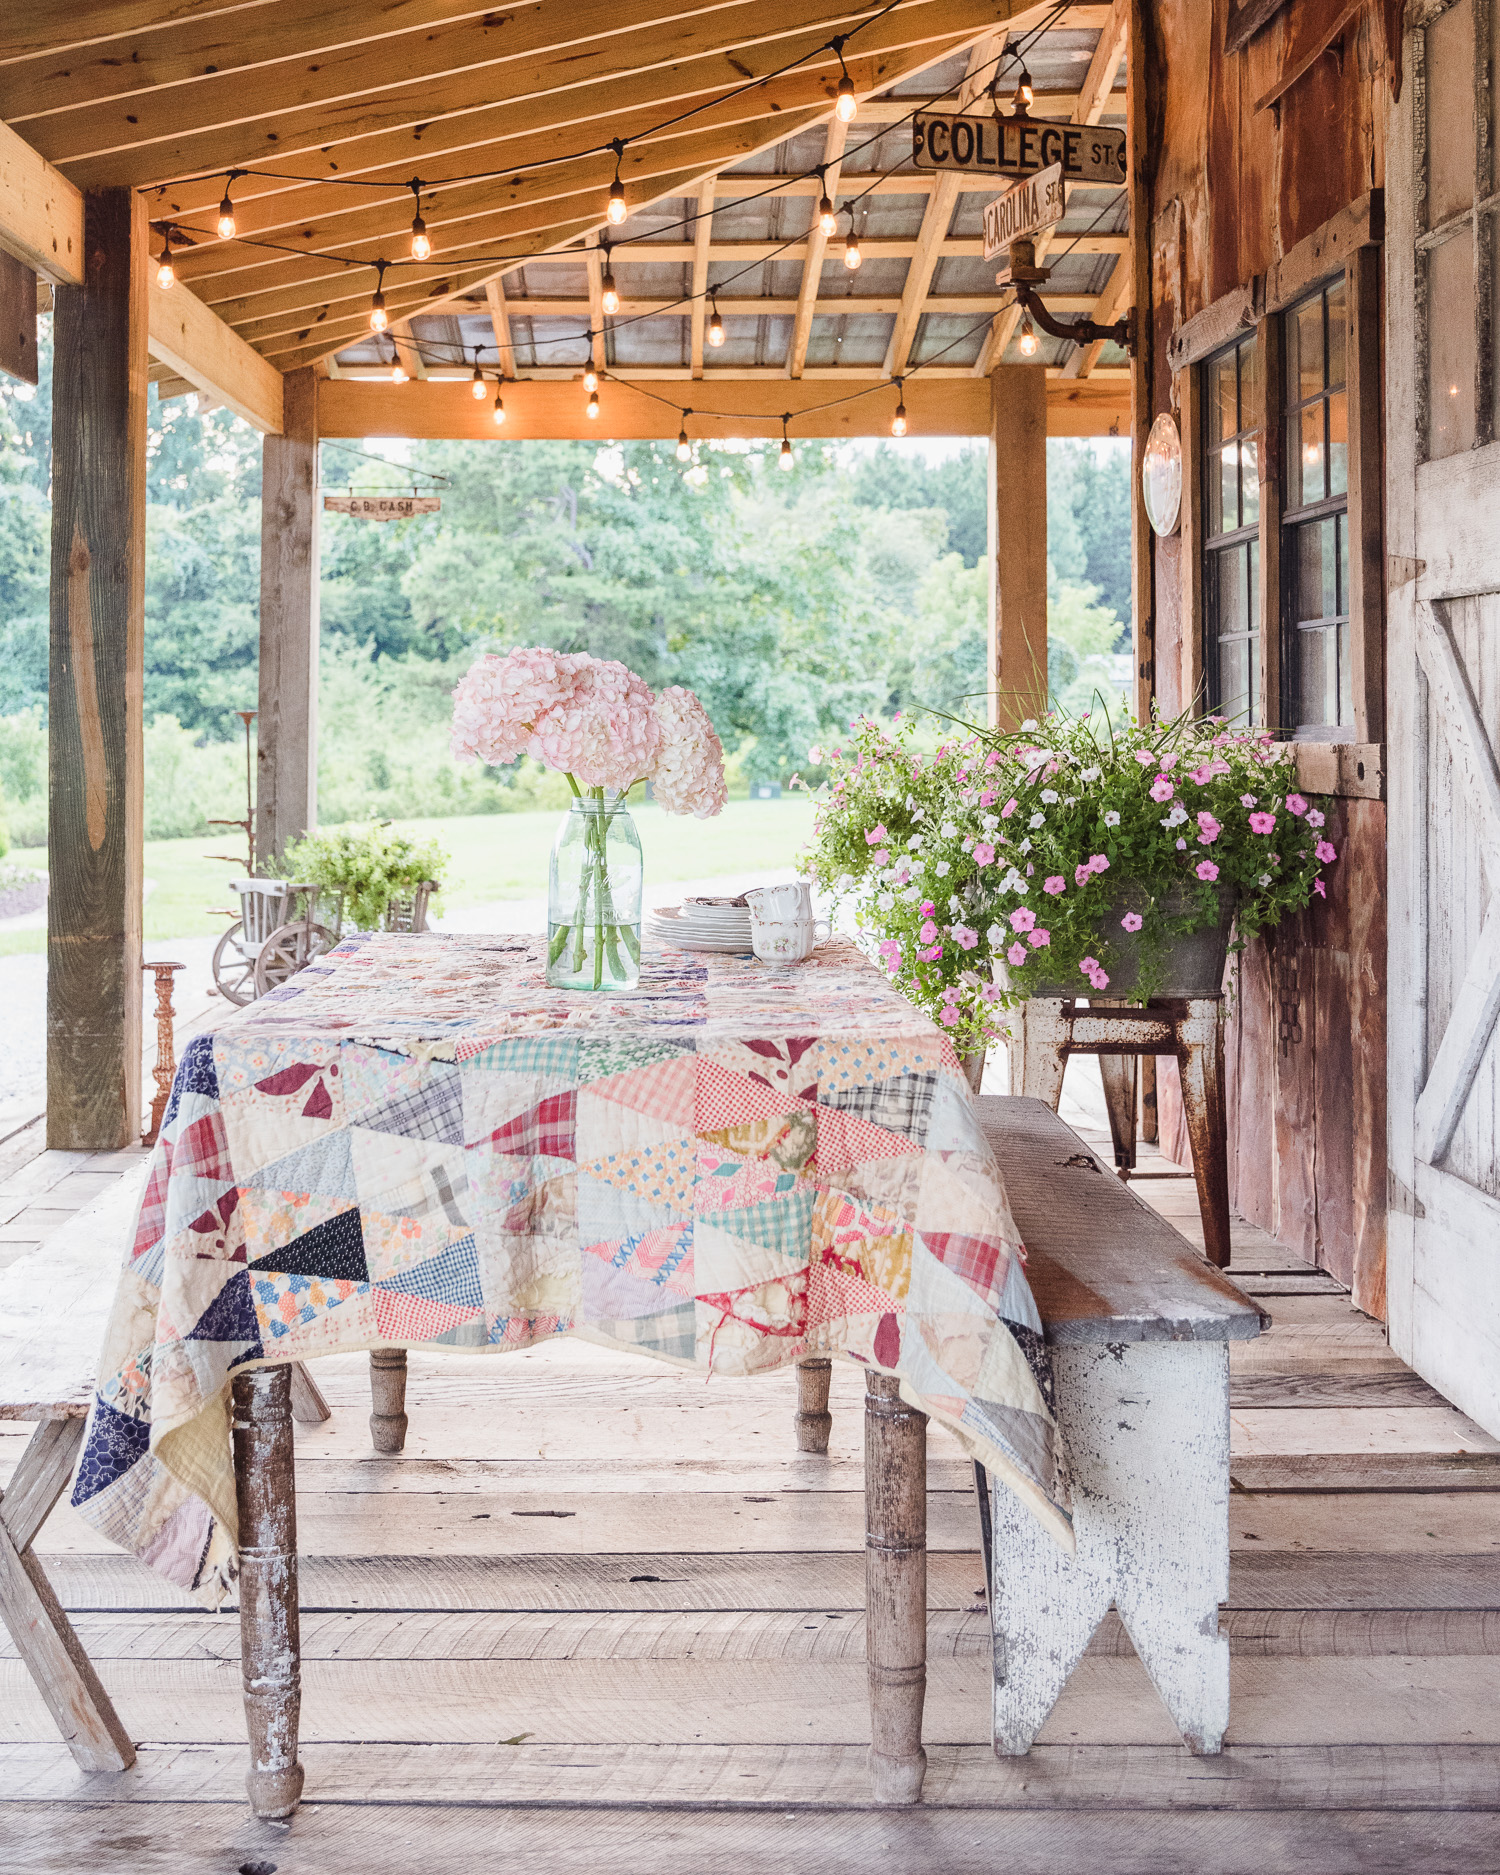 Our barn porch was featured in Country Living for NC. We feel excited & honored